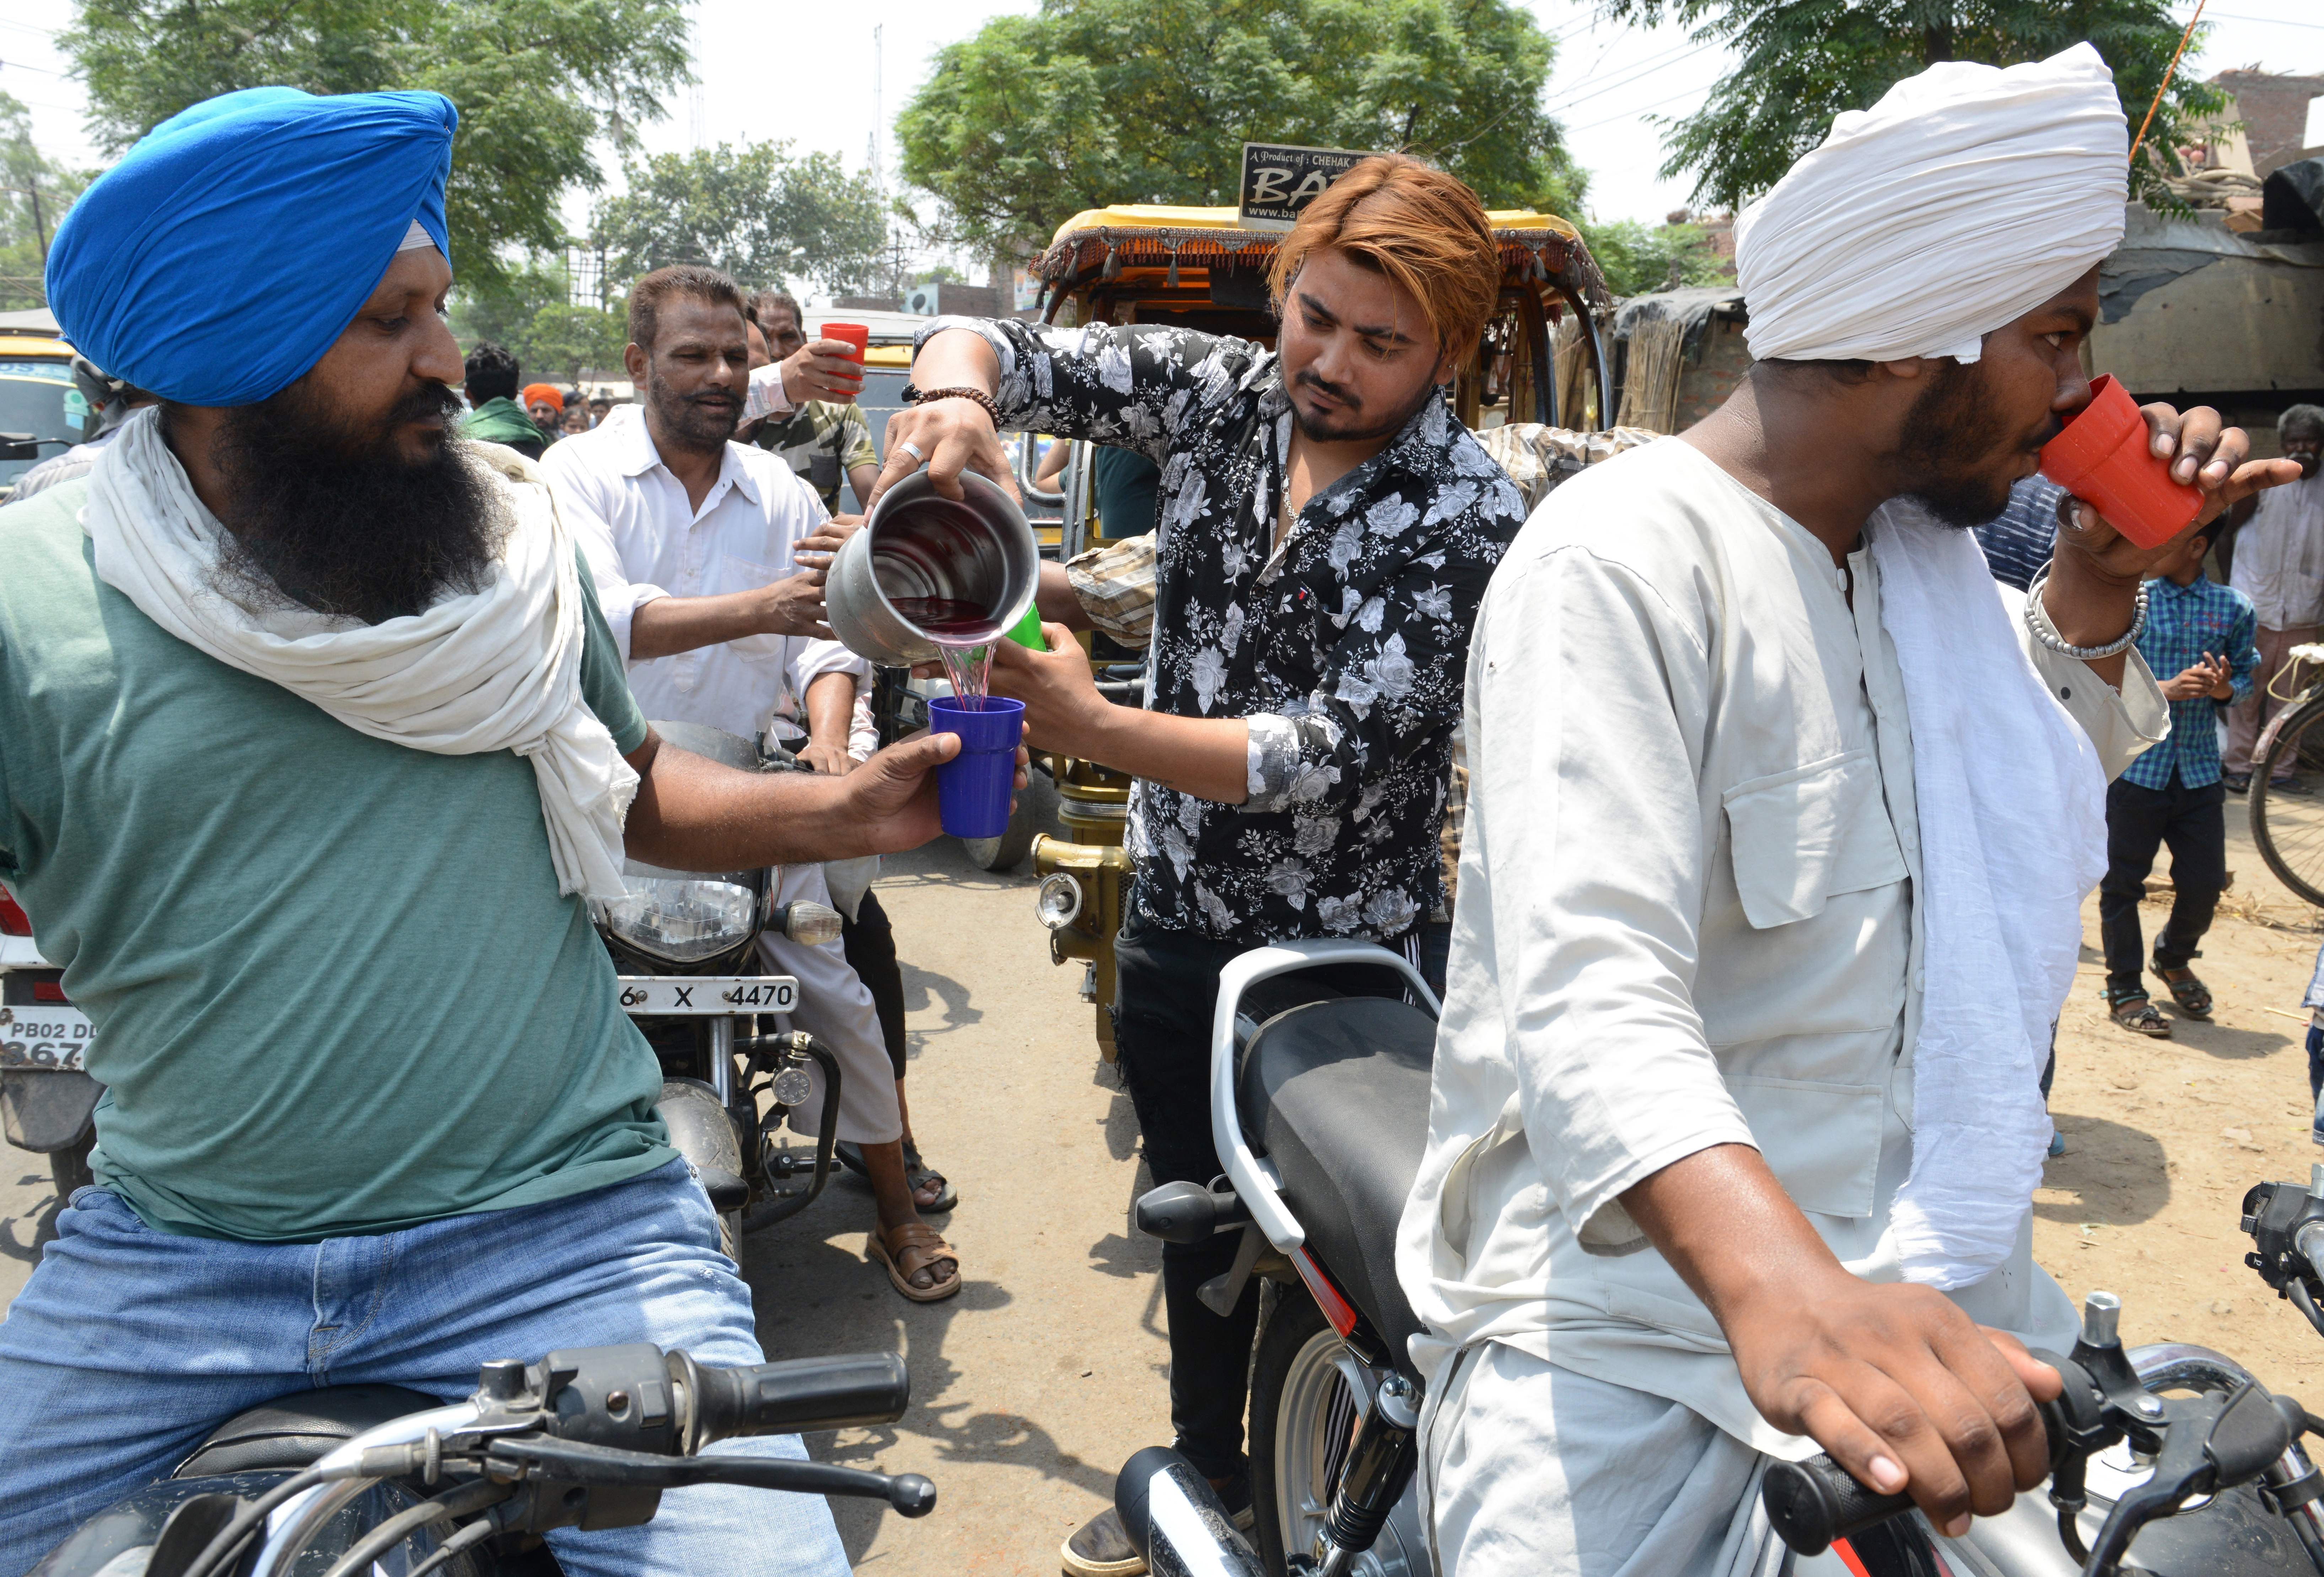 volunteers distribute sweet water during a hot summer day, in Amritsar on June 2, 2019.